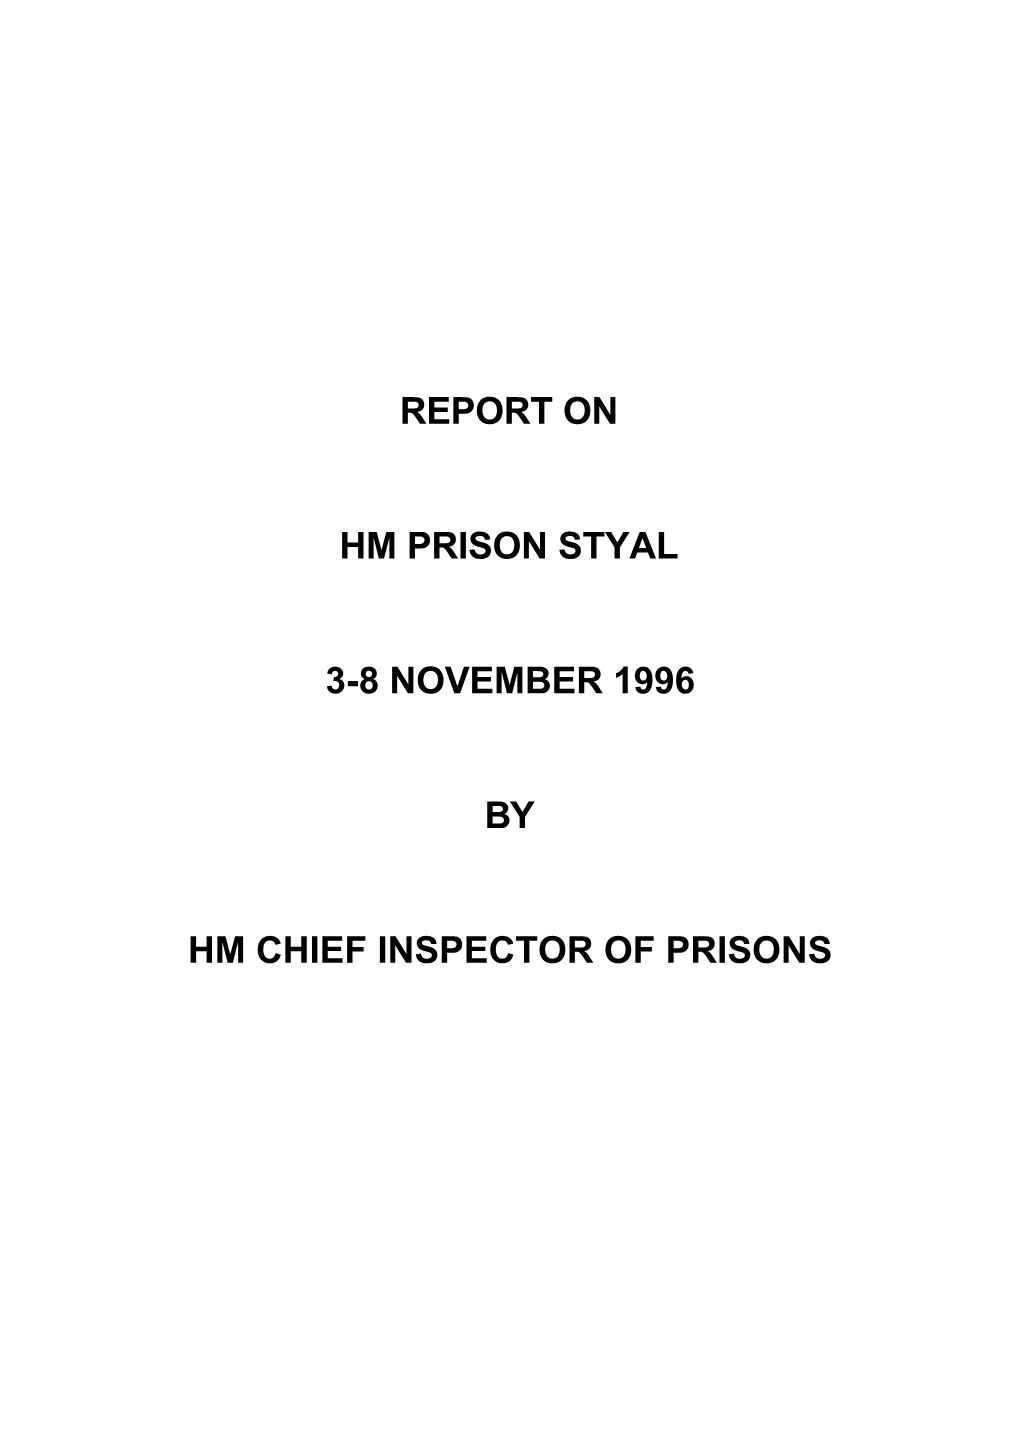 Report on Hm Prison Styal 3-8 November 1996 by Hm Chief